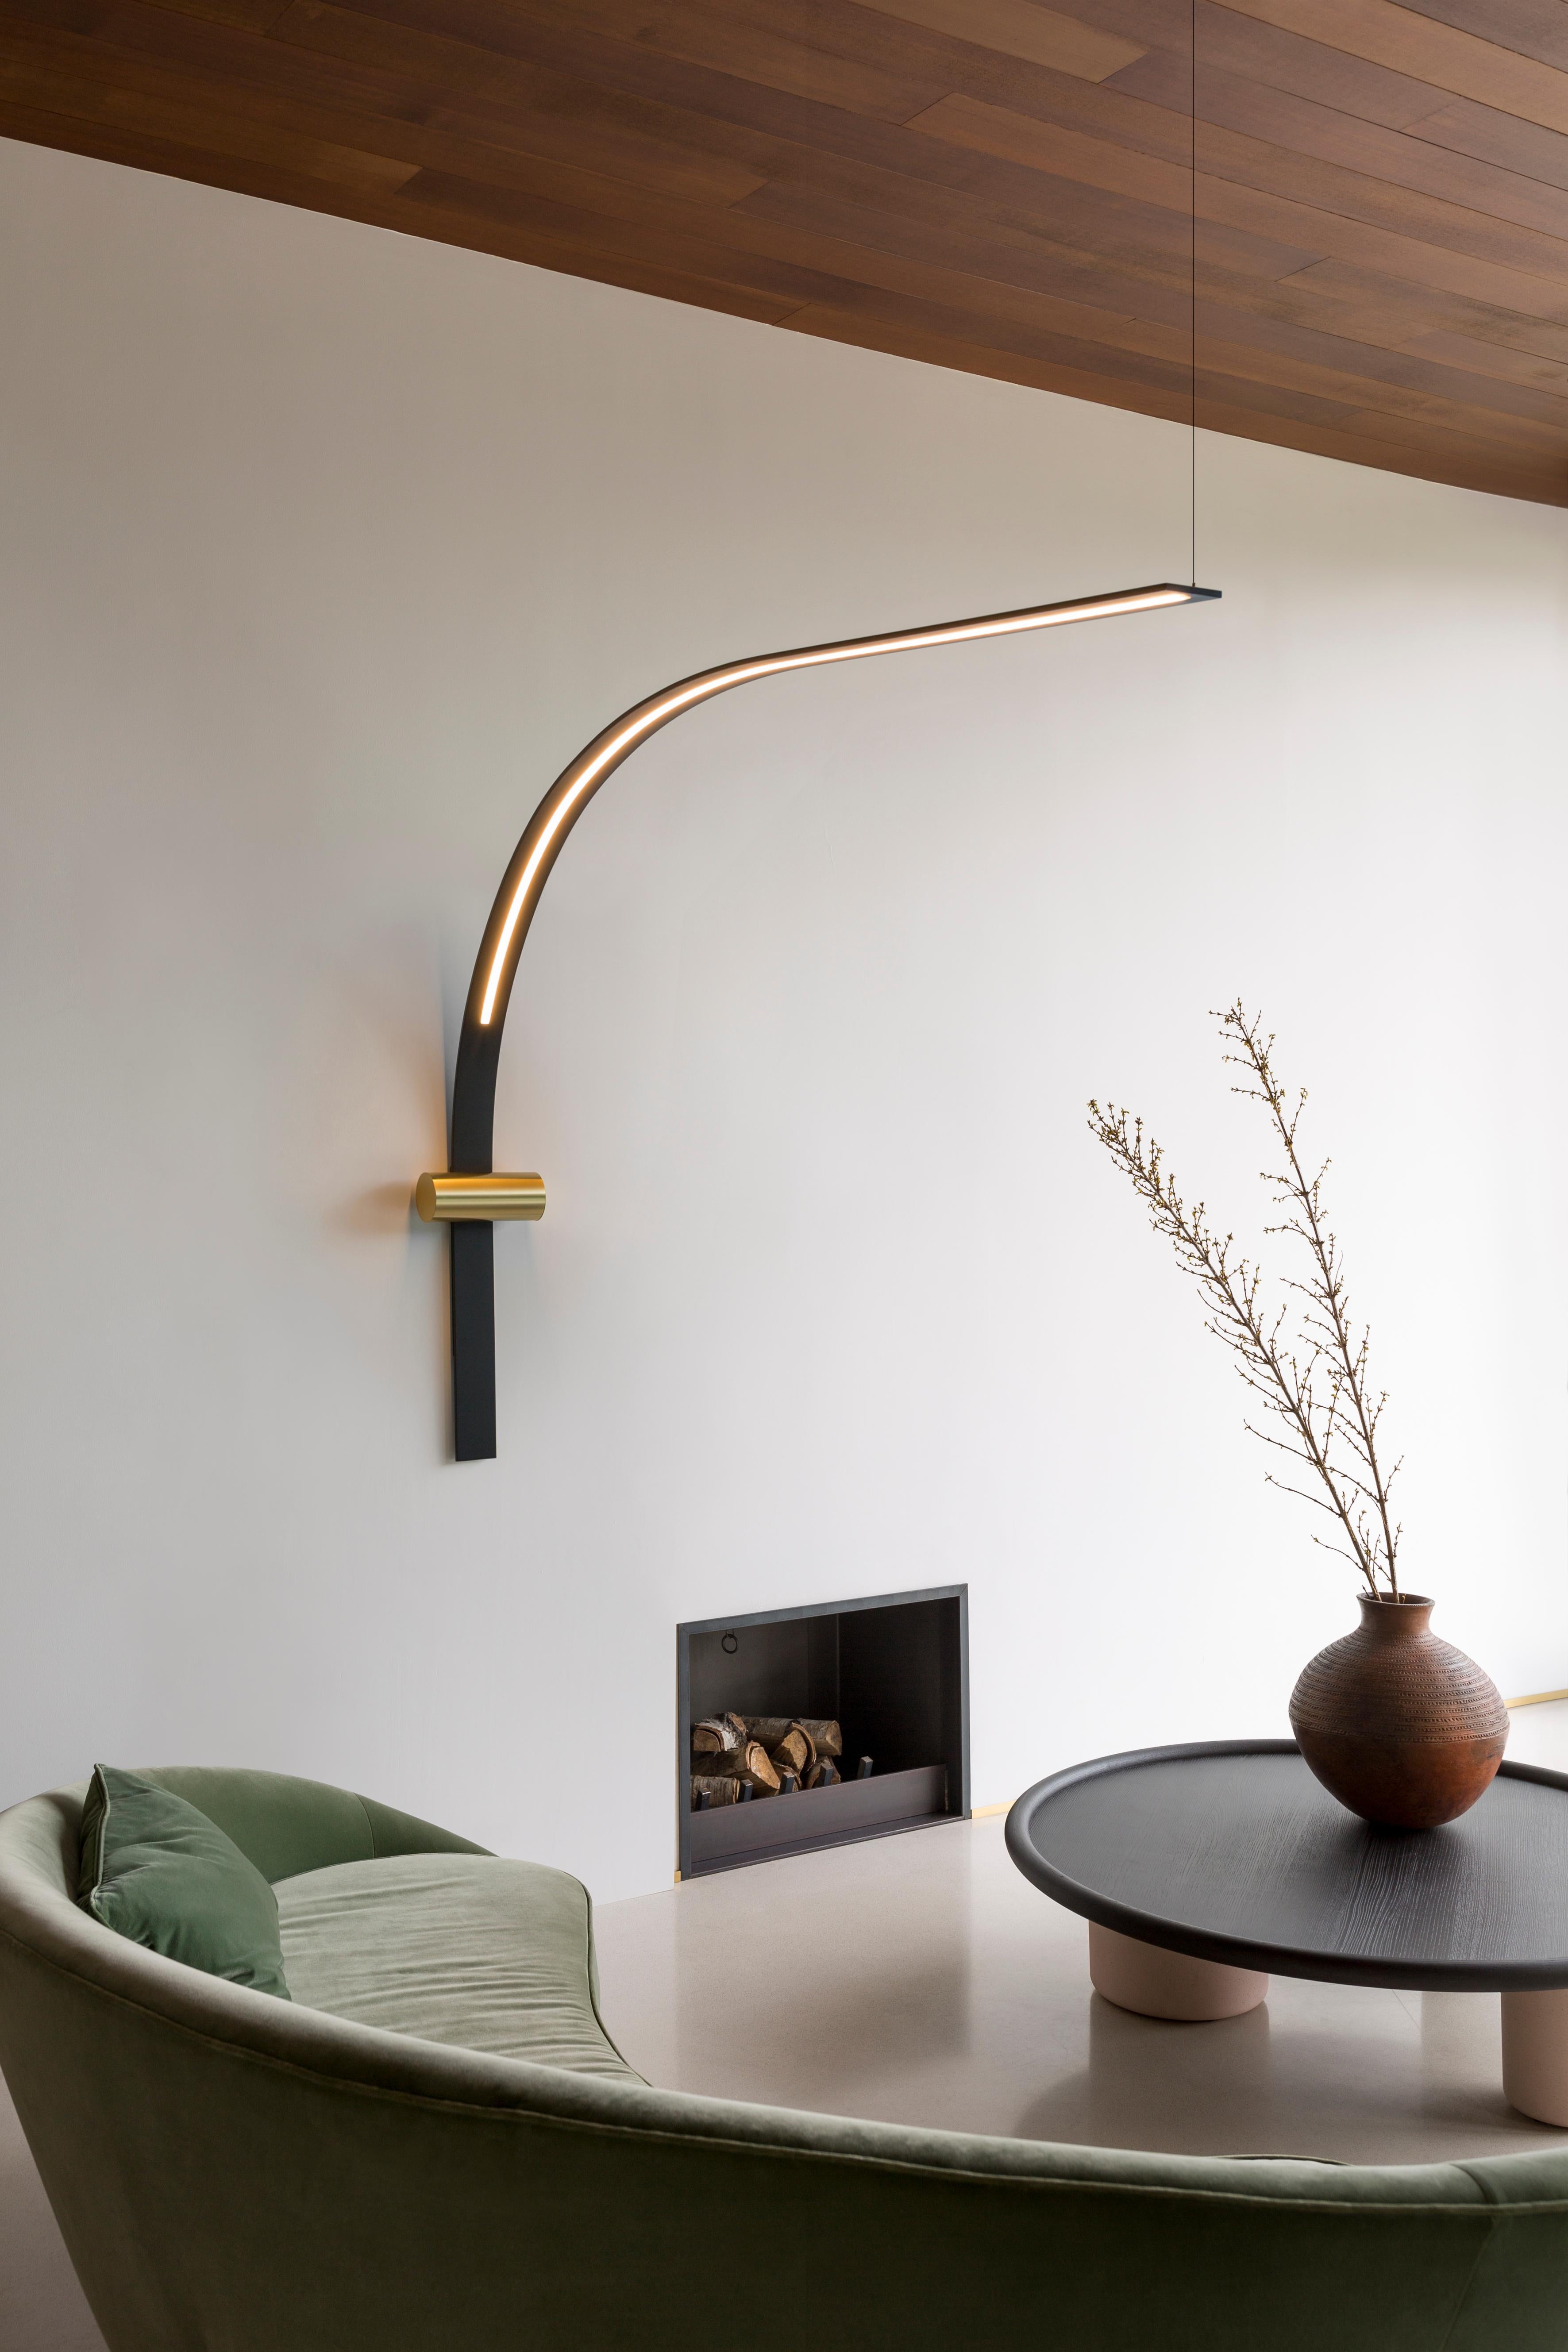 Wall lamp Nastro 563.46 by TOOY
Designer: Studiopepe

Model shown: Sand Balck hardware + Beige cylinder
Dimensions: H. 130 x W. 138 x D. 25 cm
Source light: 1 x LED 220/240V Compliant with US electric system

The Nastro wall lamps sees an epoxy